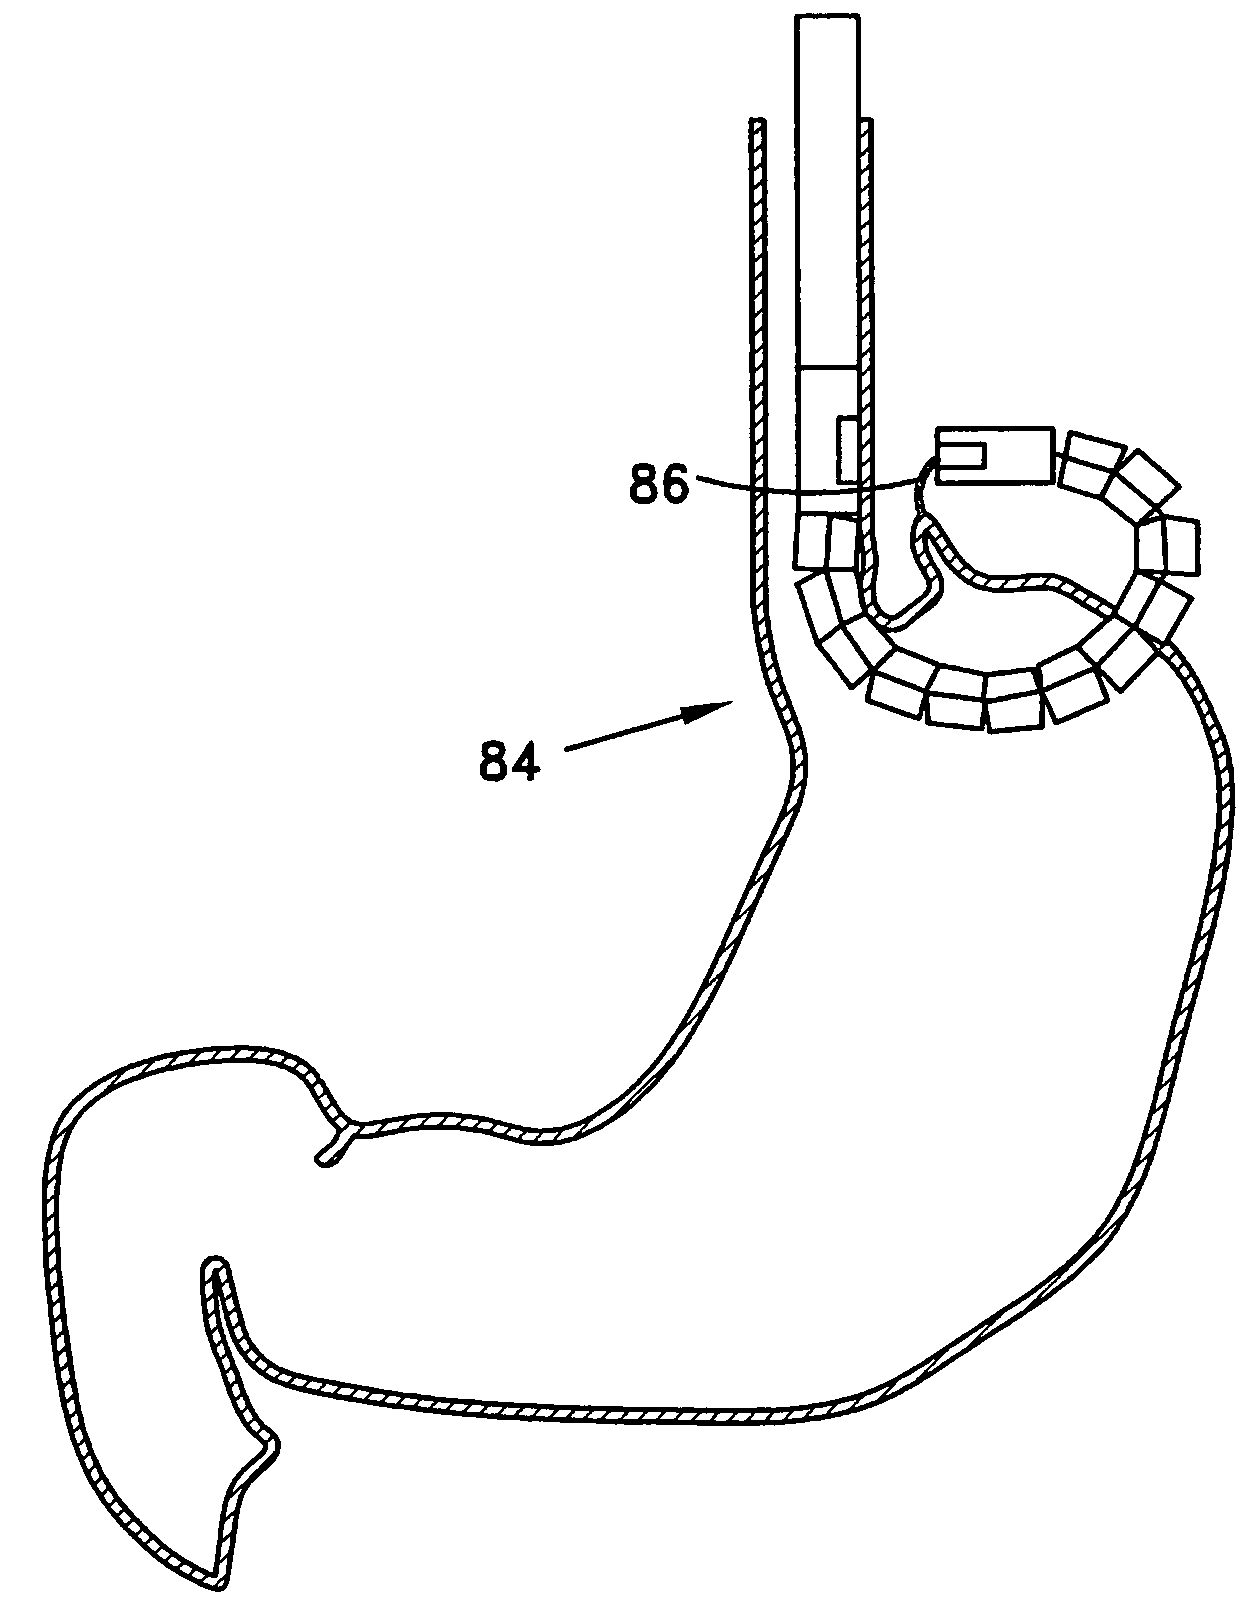 Transgastric method for carrying out a partial fundoplication